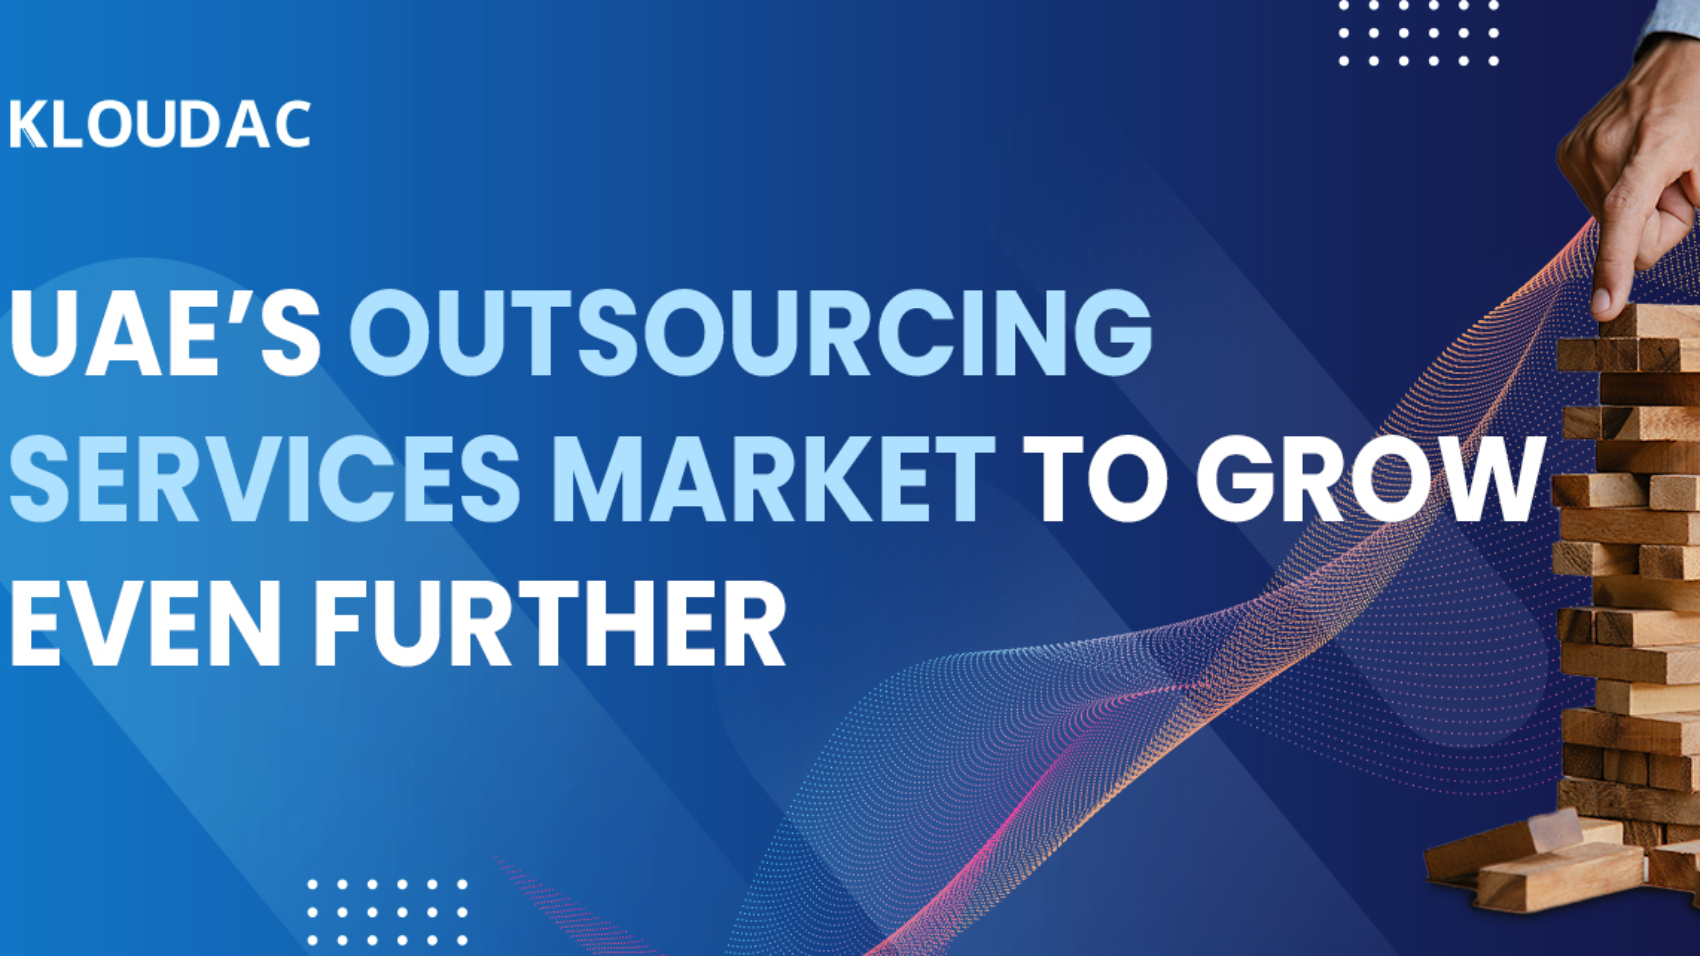 UAE’s outsourcing services market to grow even further